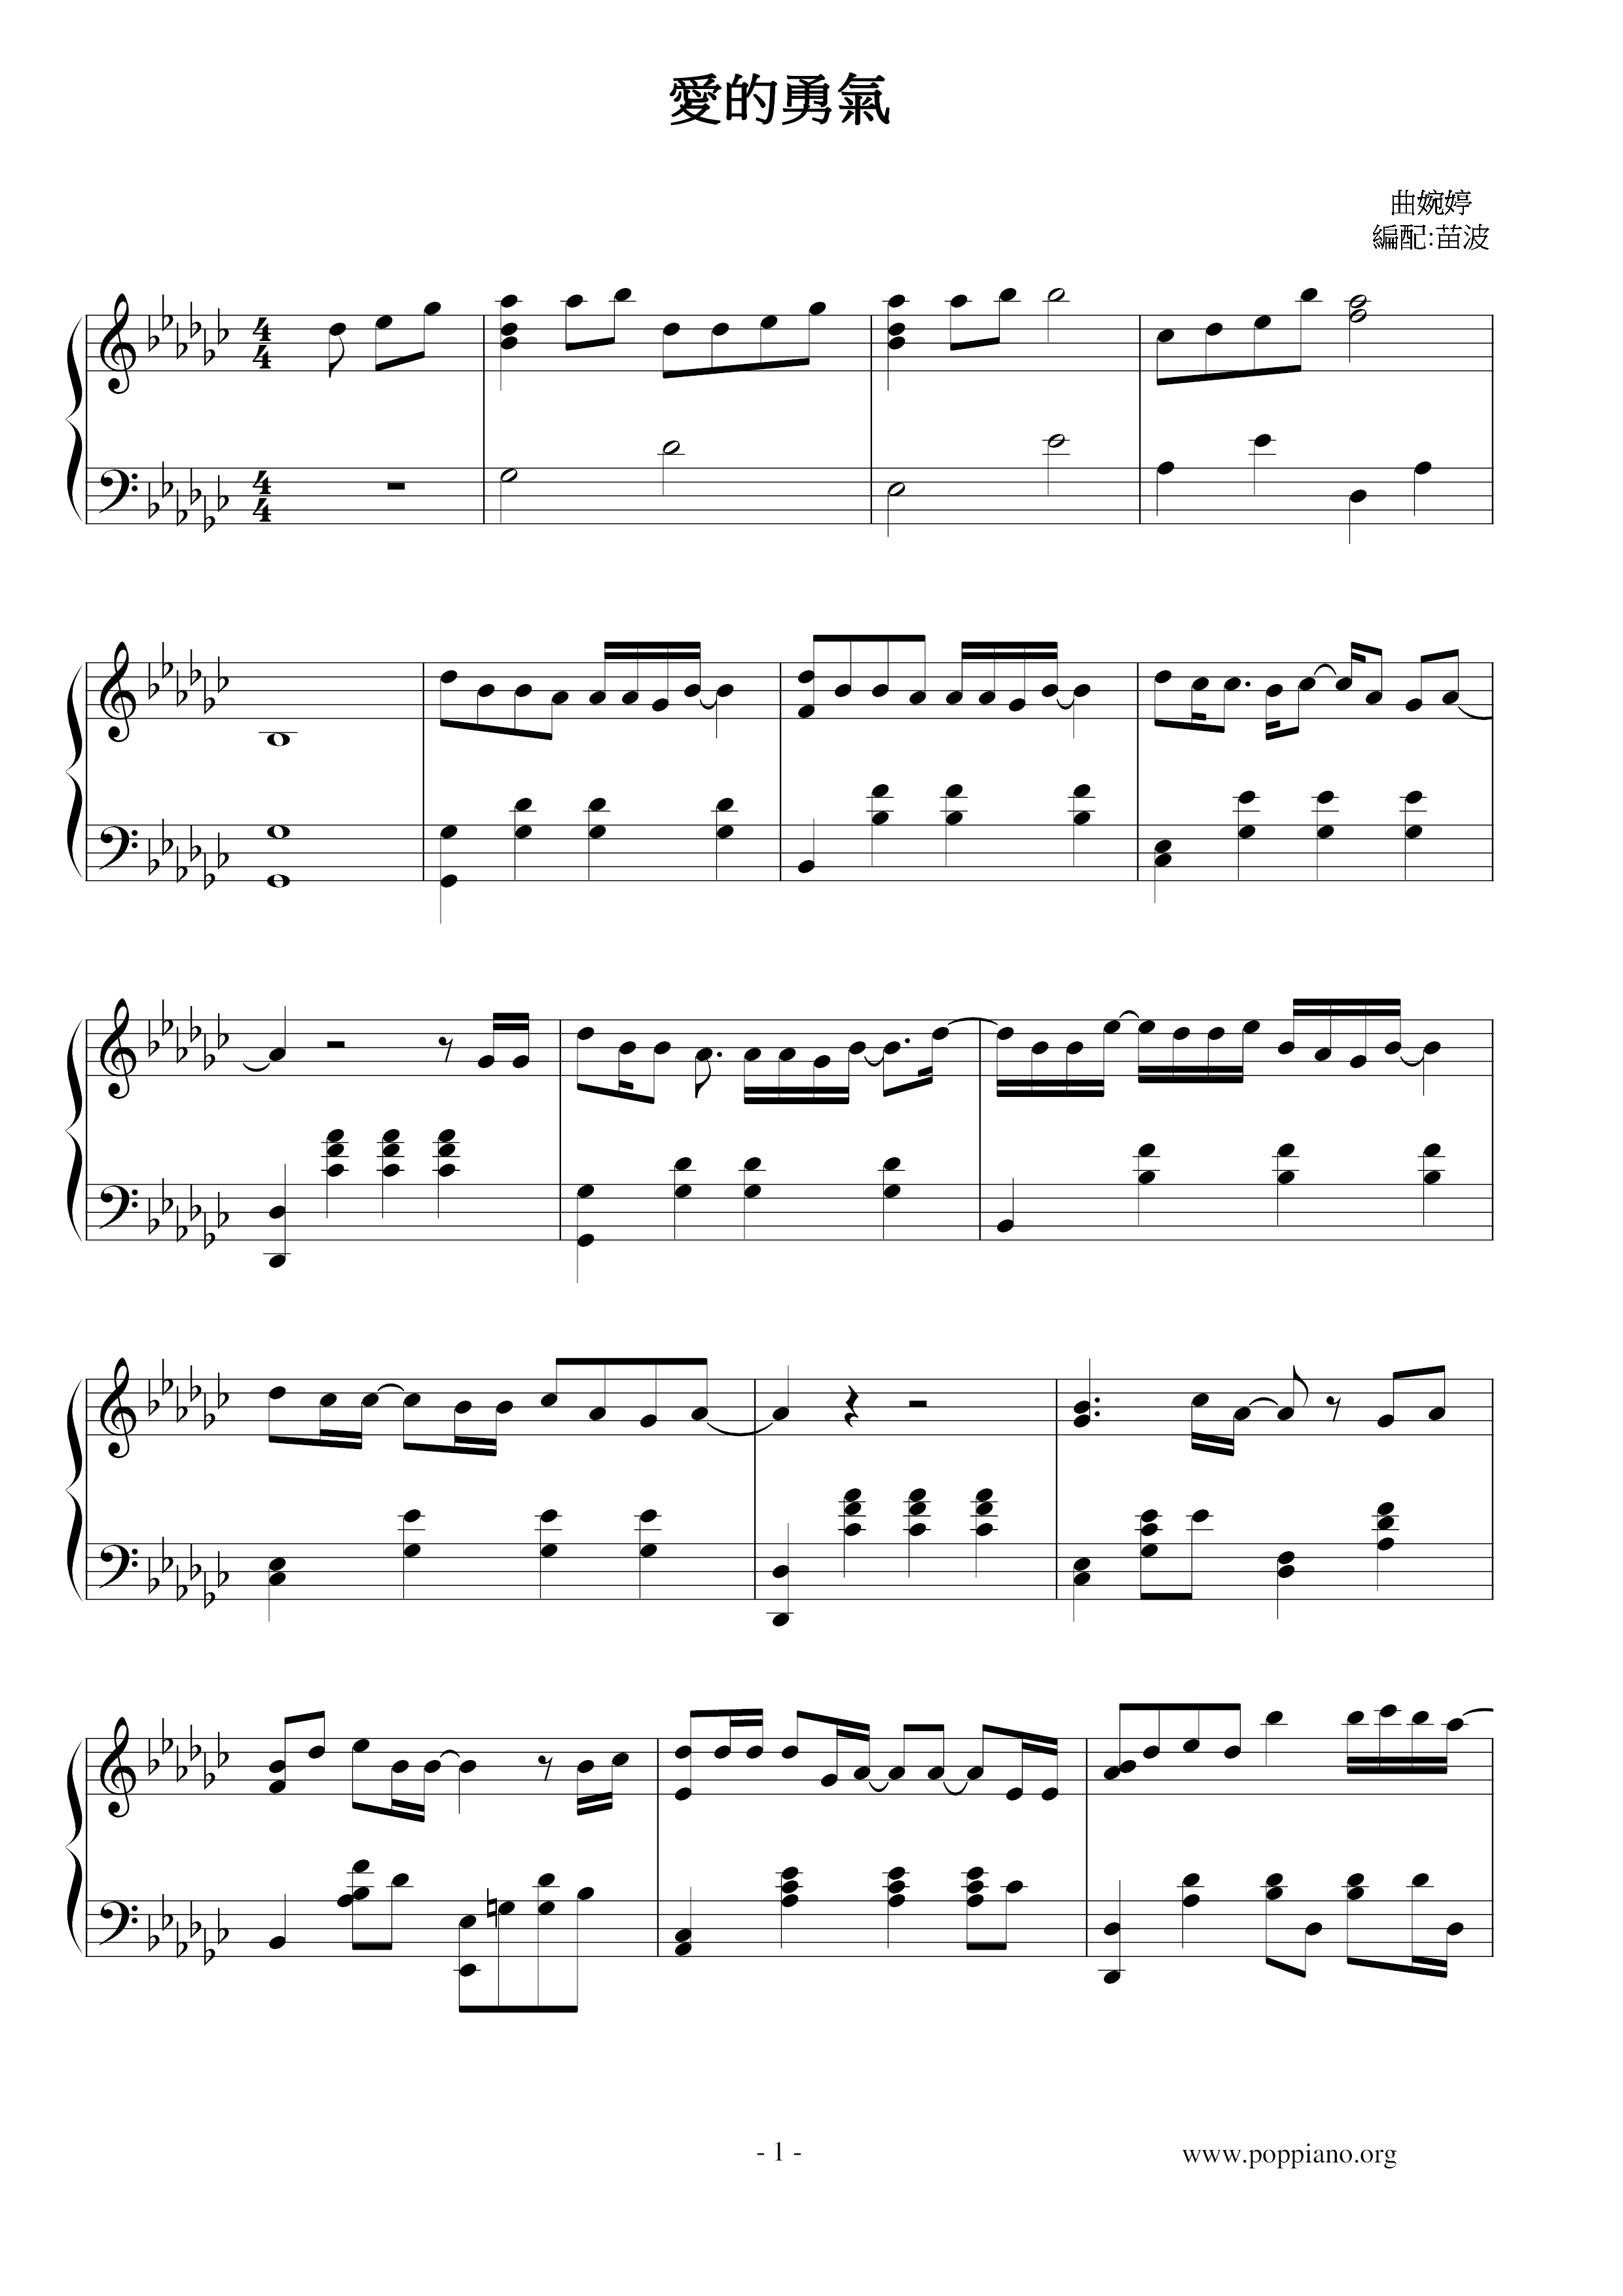 Courage Of Love Score